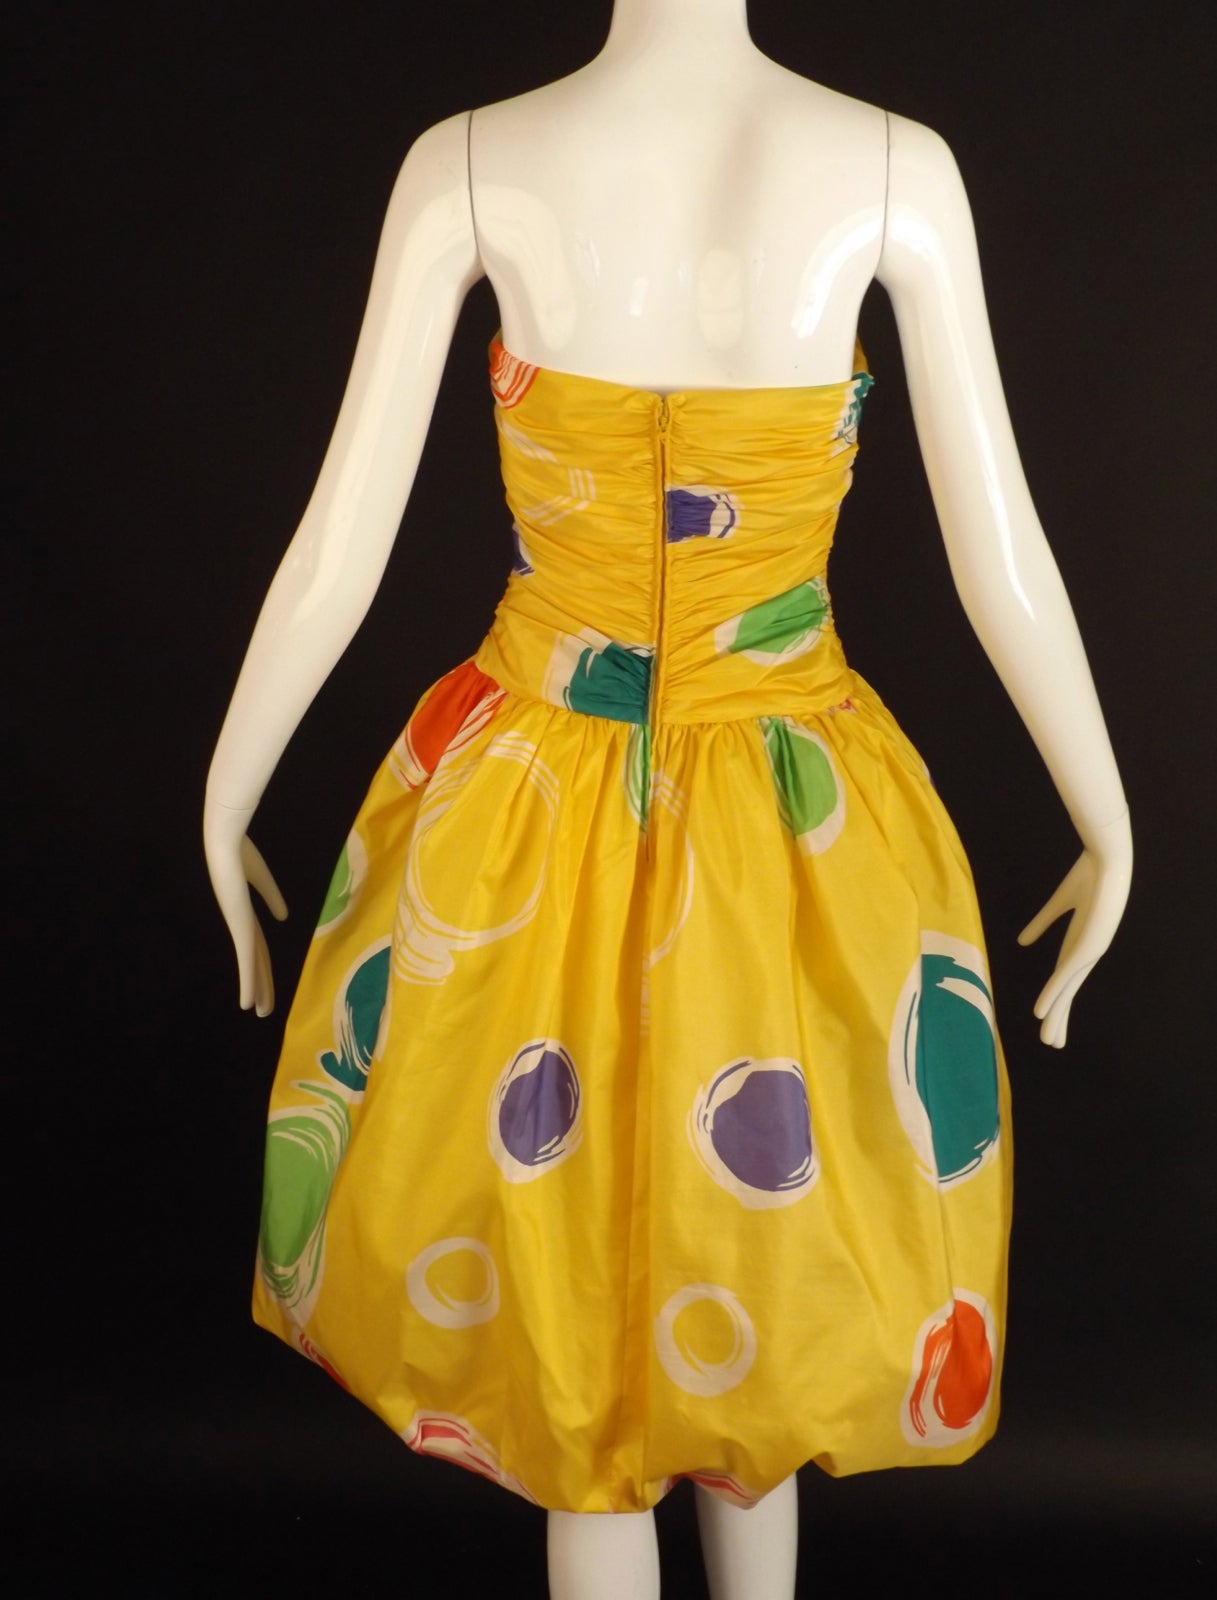 Adorable 1980s cocktail dress in yellow silk with a purple, green, orange and white polka dot pattern. The dress has a bustier liner with the silk shirred down the sides creating draping across the front and back. Dropped waistline with a full